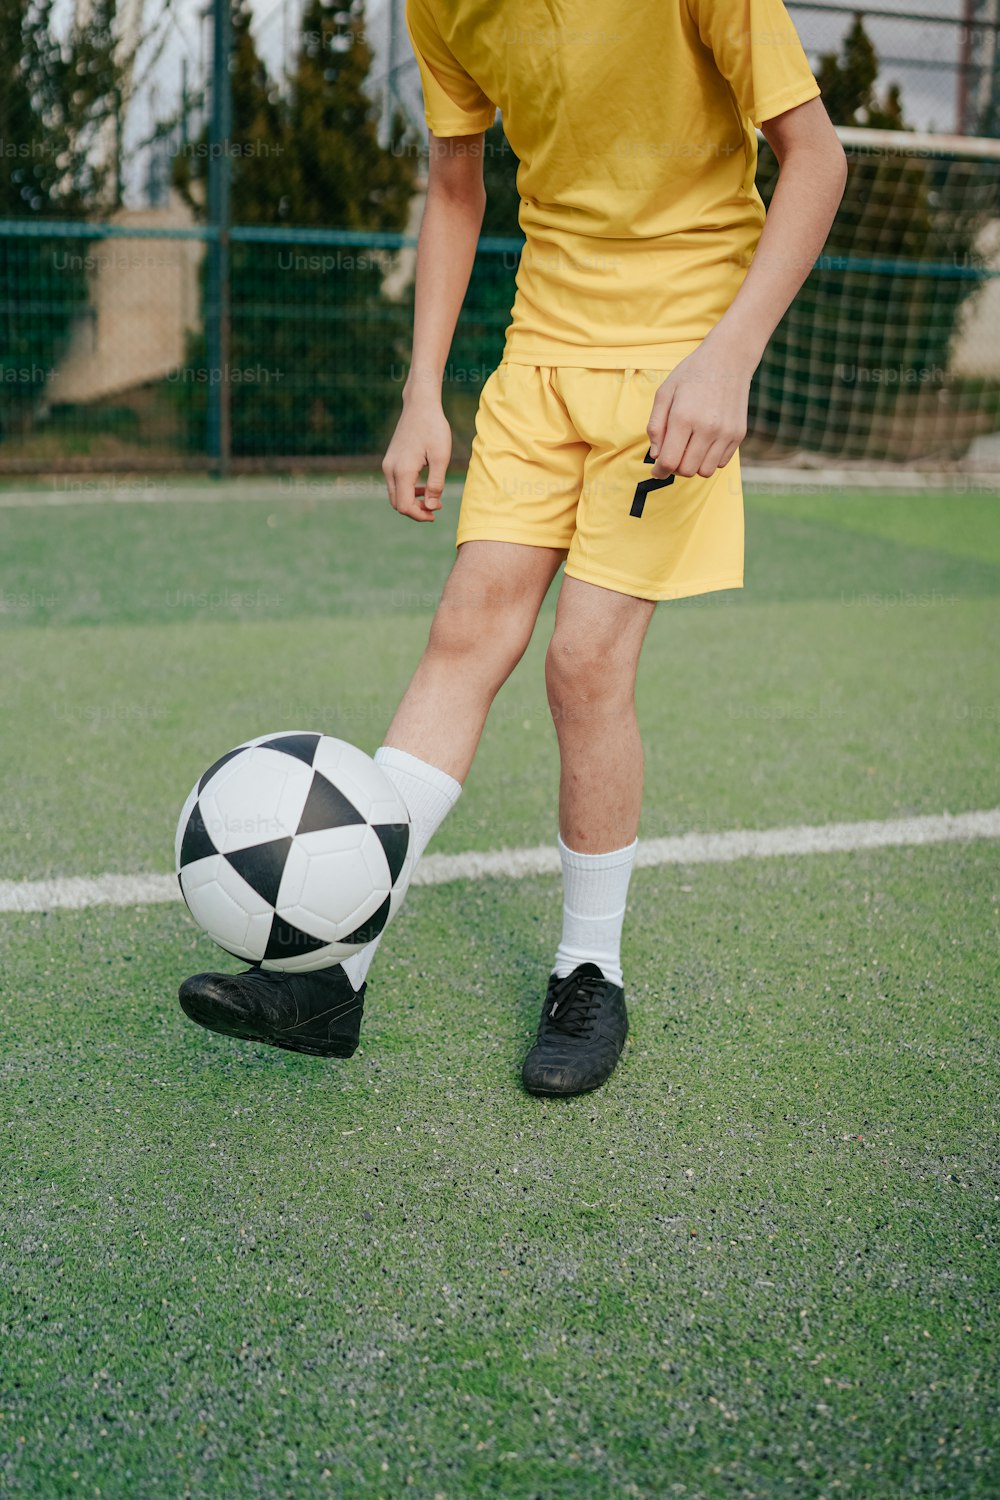 a young man in a yellow uniform kicking a soccer ball